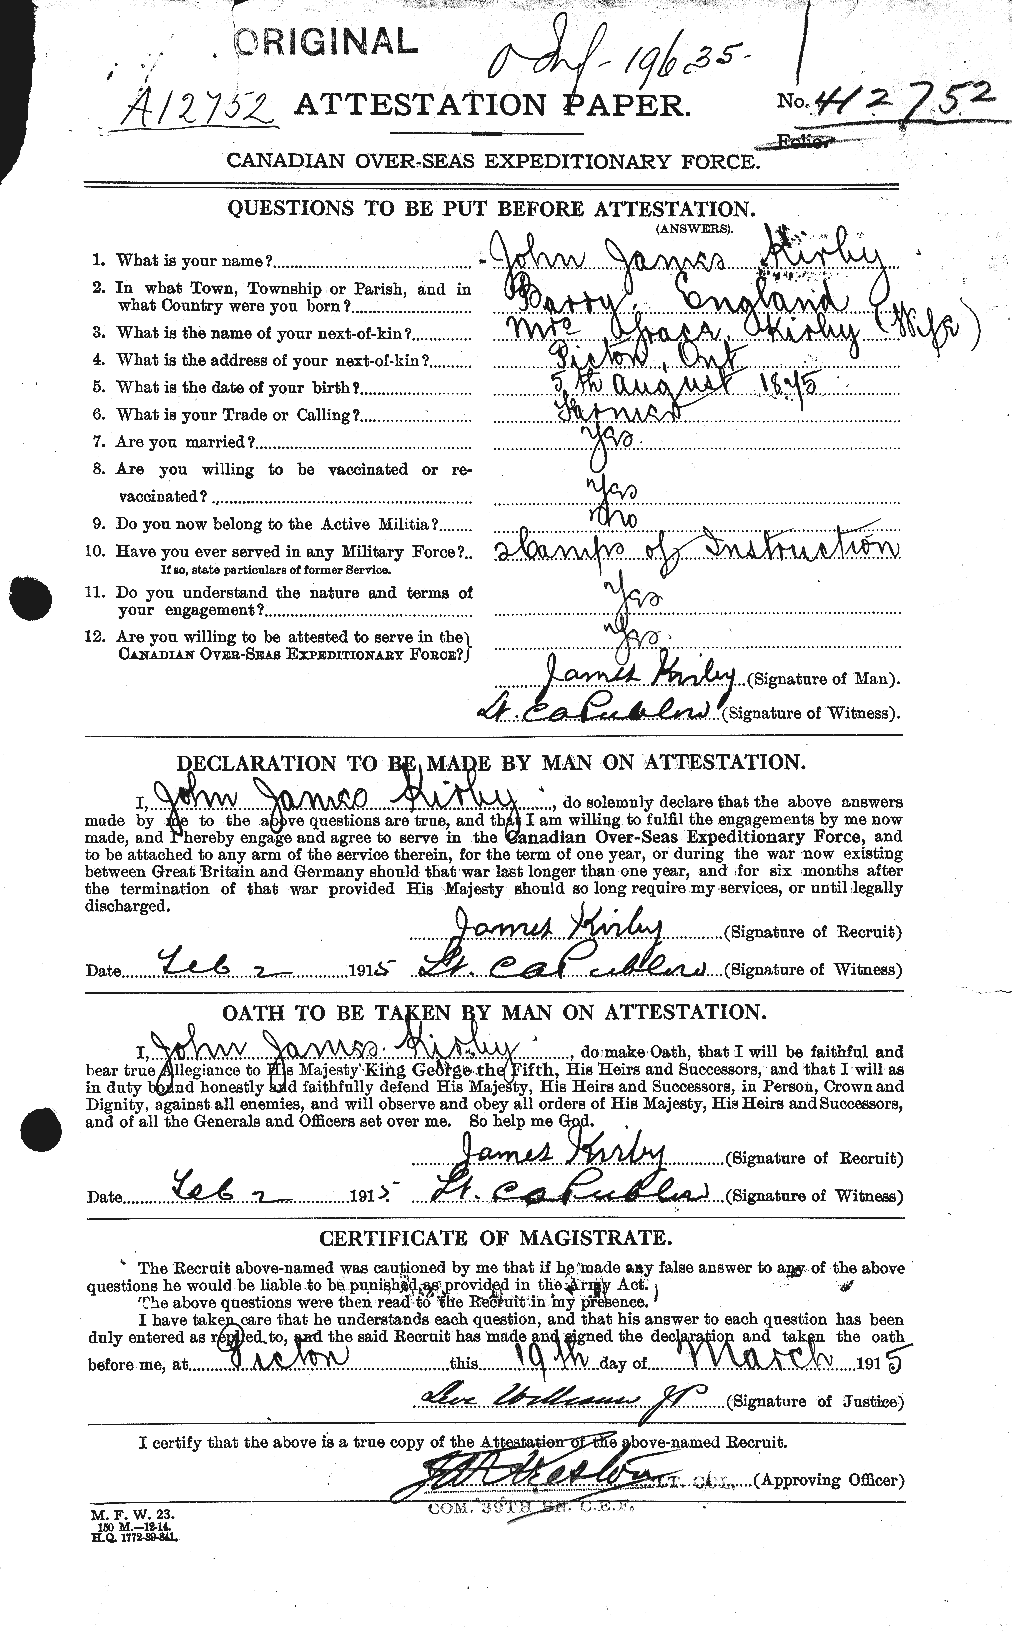 Personnel Records of the First World War - CEF 437233a